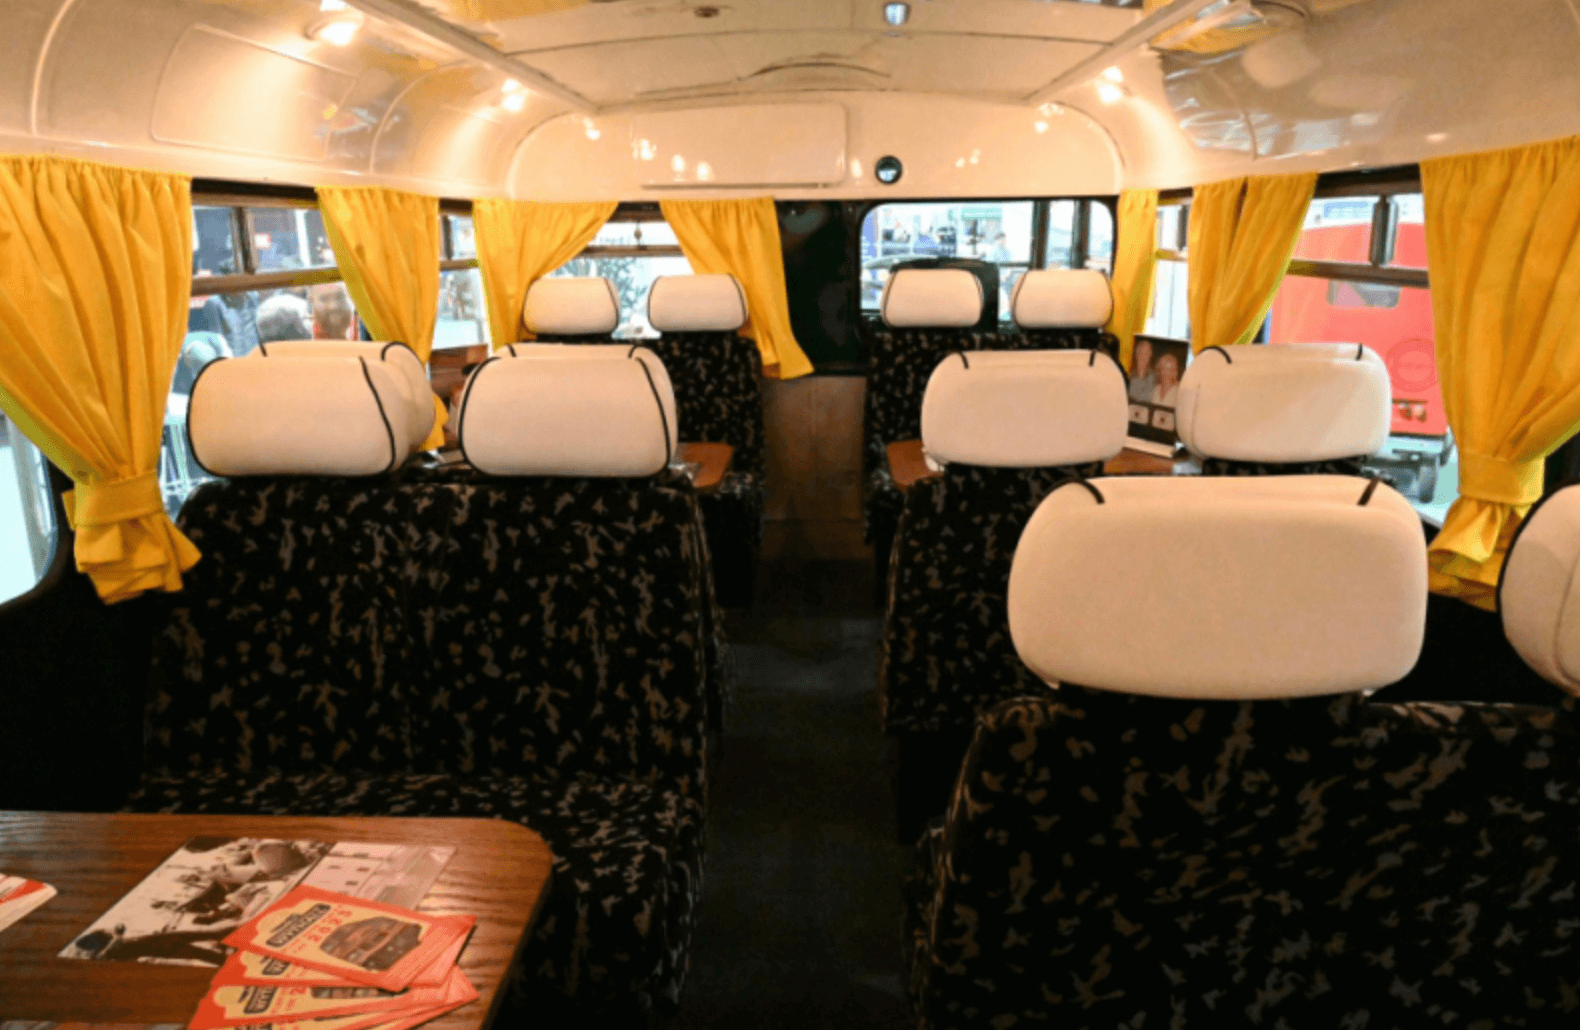 Interiors of the Wings Tour Bristol double-decker bus